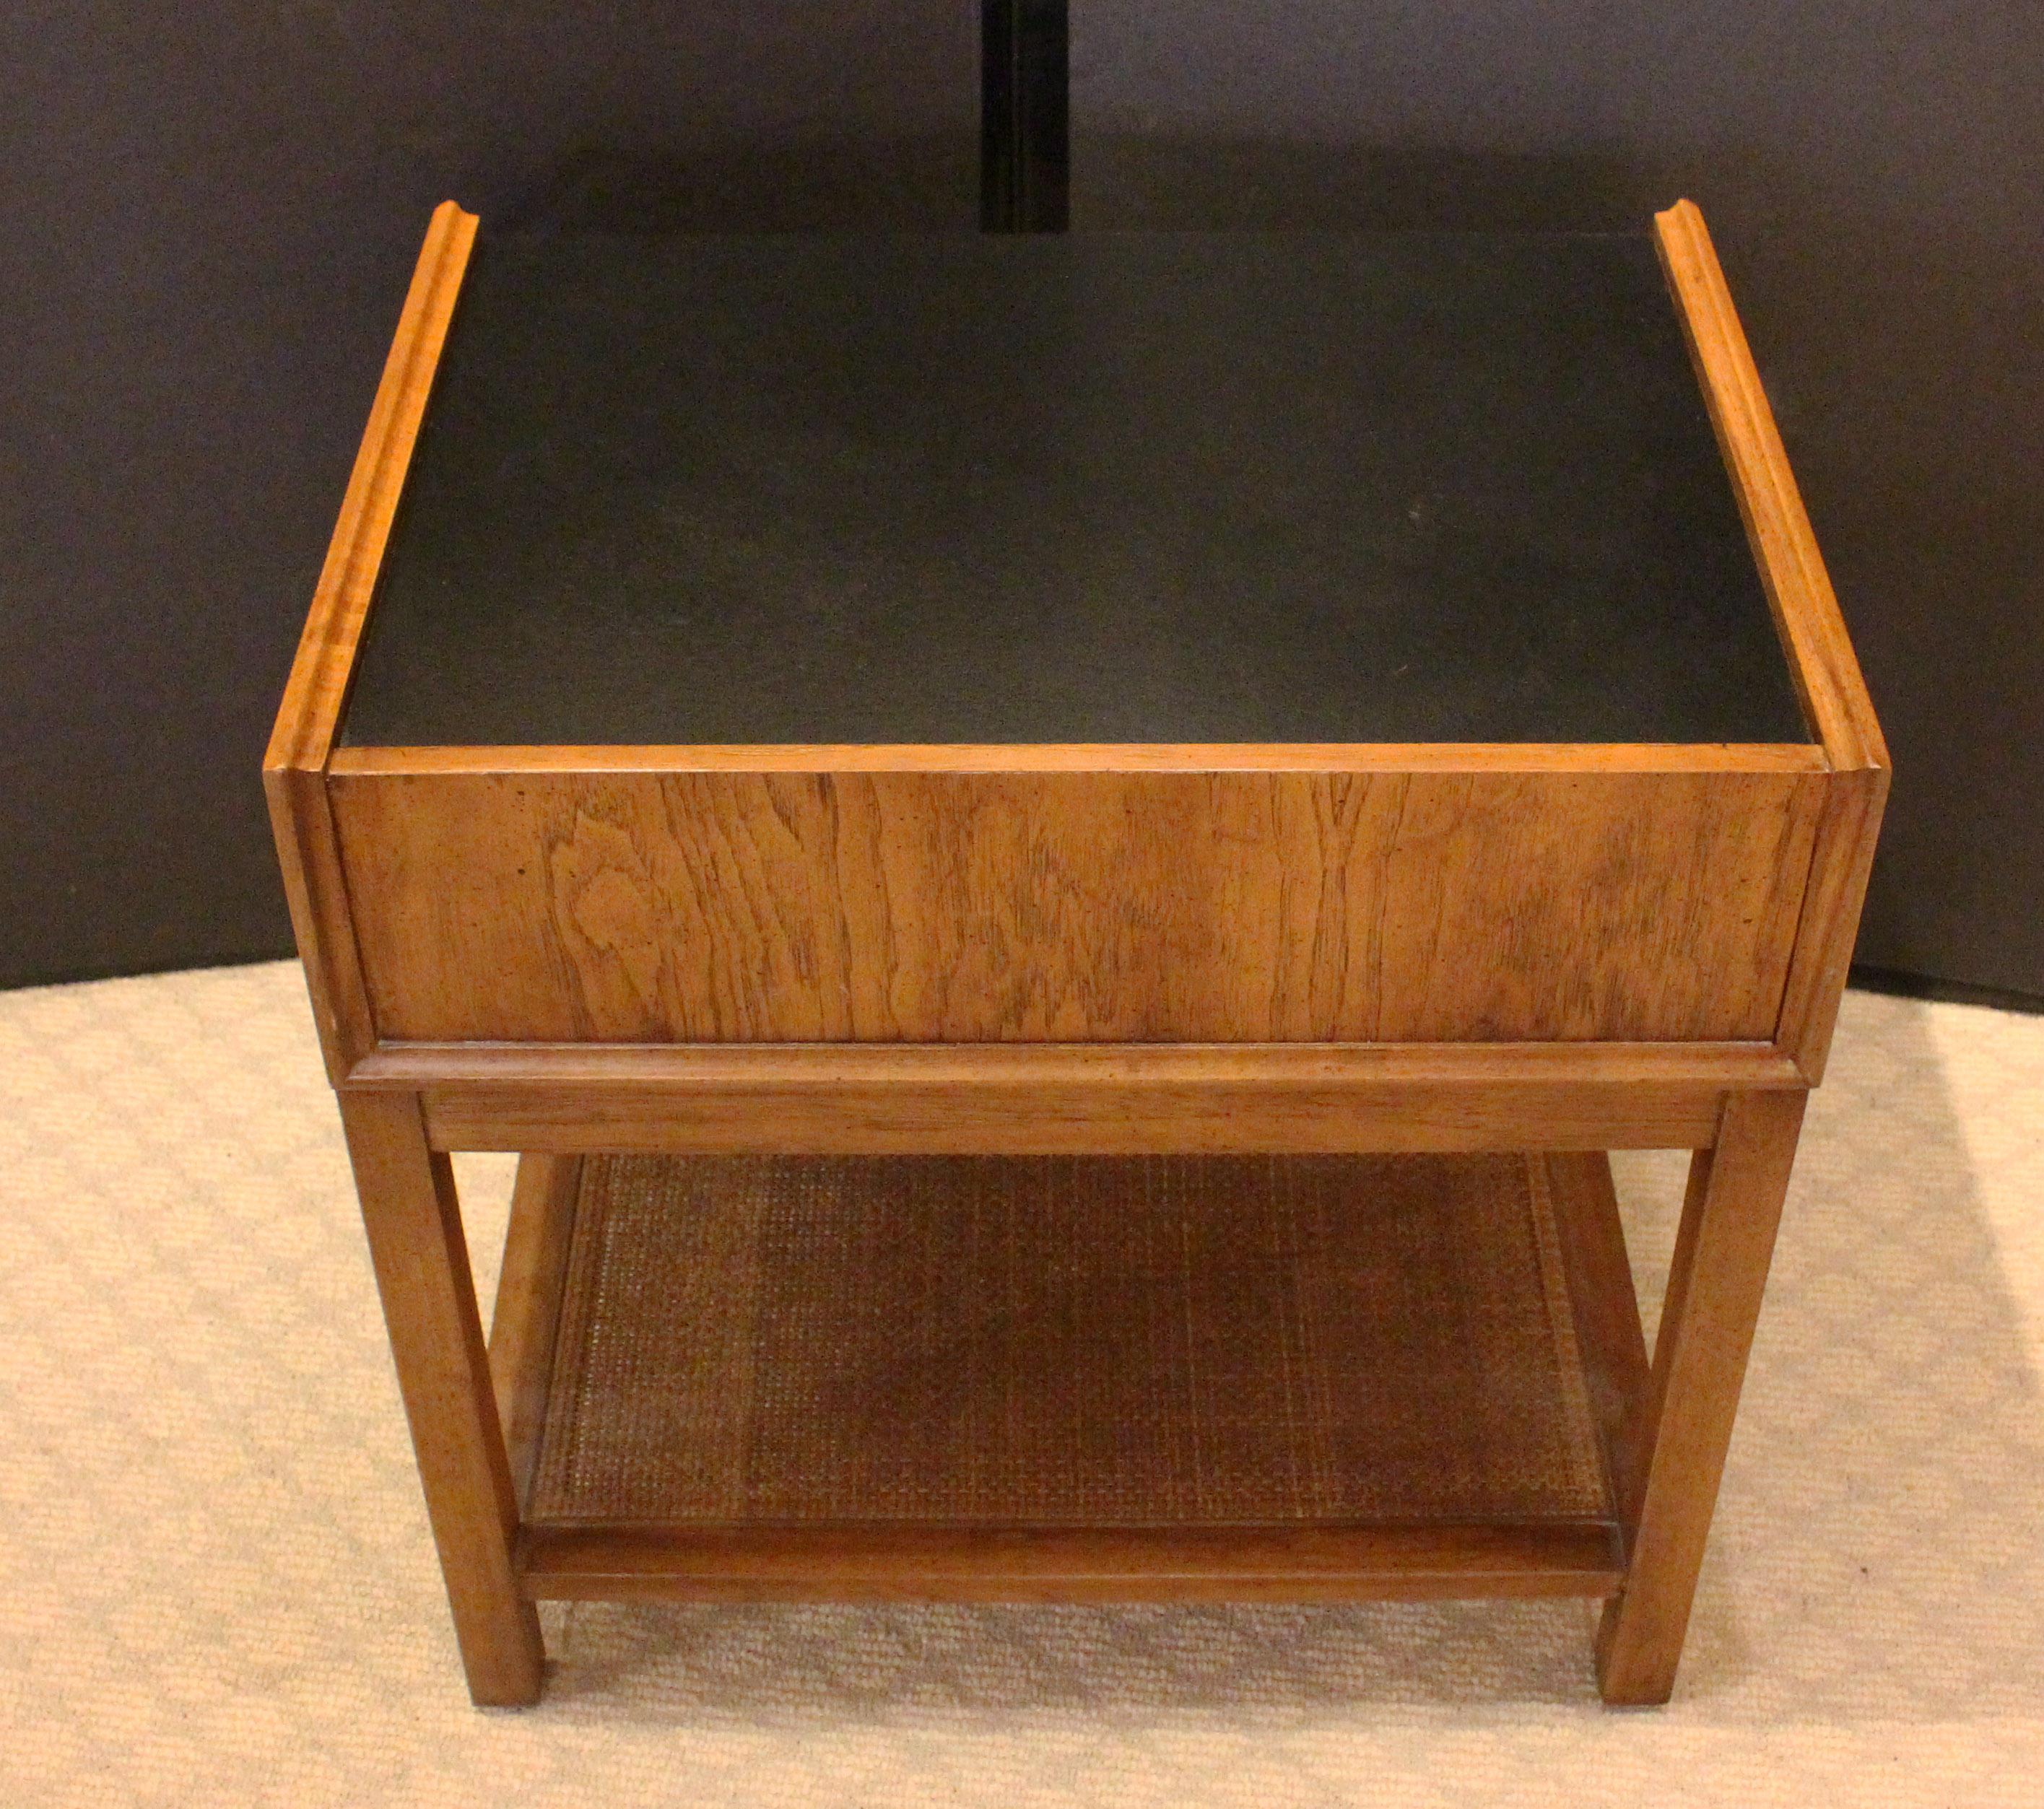 Circa 1960s Mid-Century Modern Night Stand by Founders In Good Condition For Sale In Chapel Hill, NC